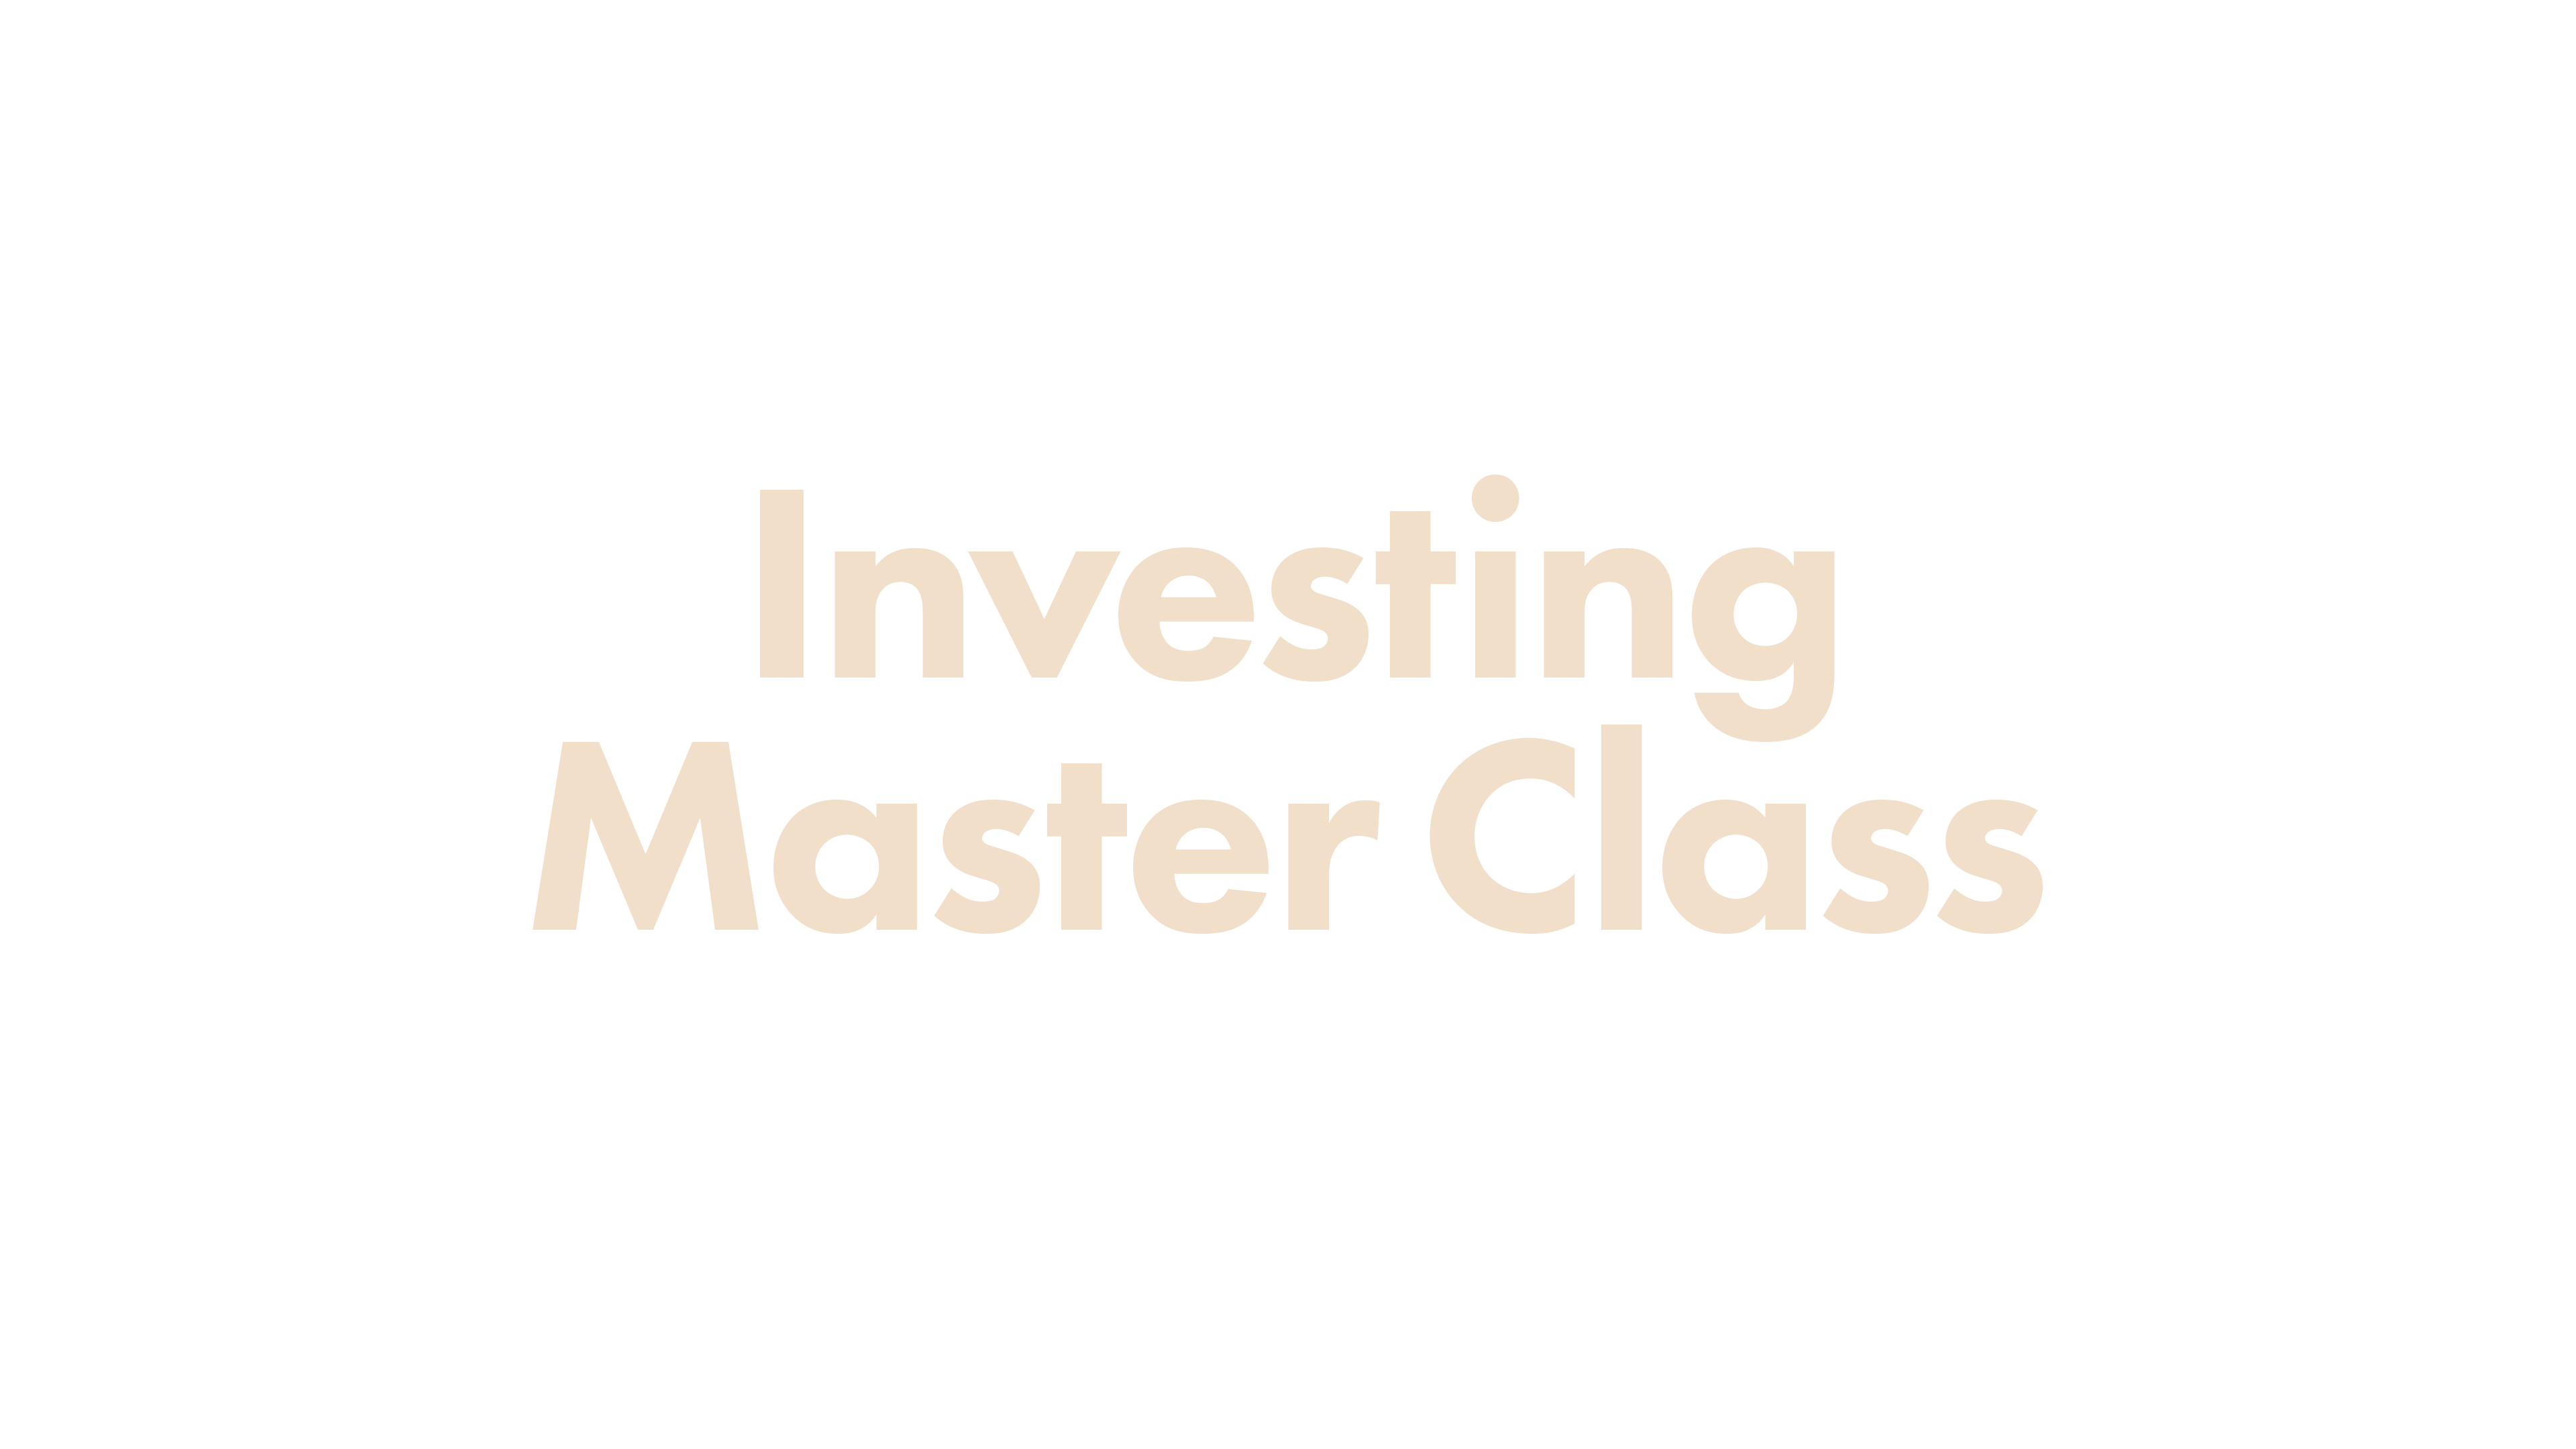 Investing Master Class